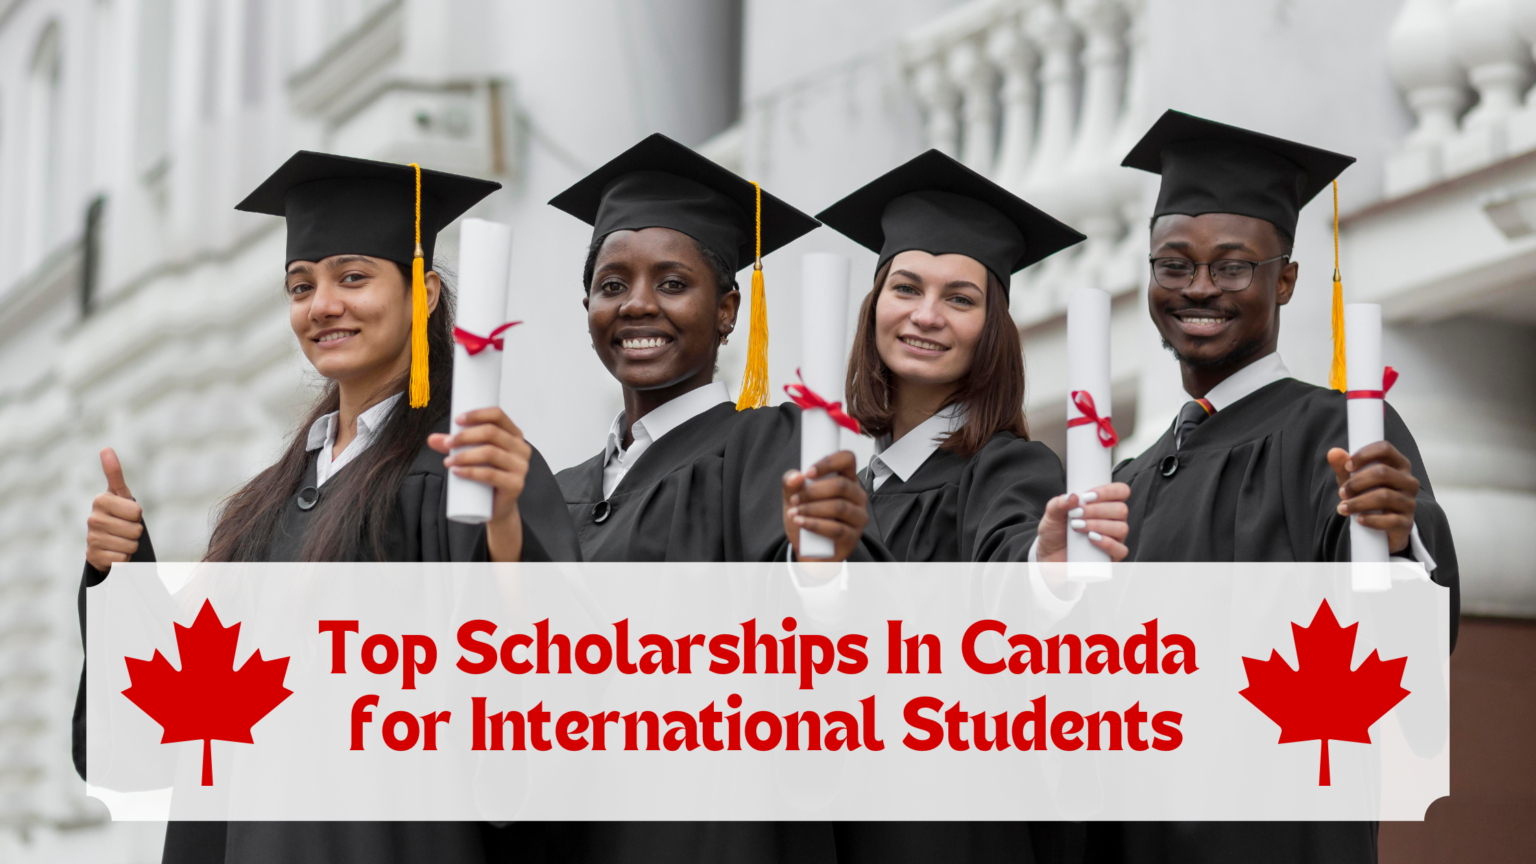 GOVERNMENT OF CANADA SCHOLARSHIPS FOR INTERNATIONAL STUDENTS IN CANADA